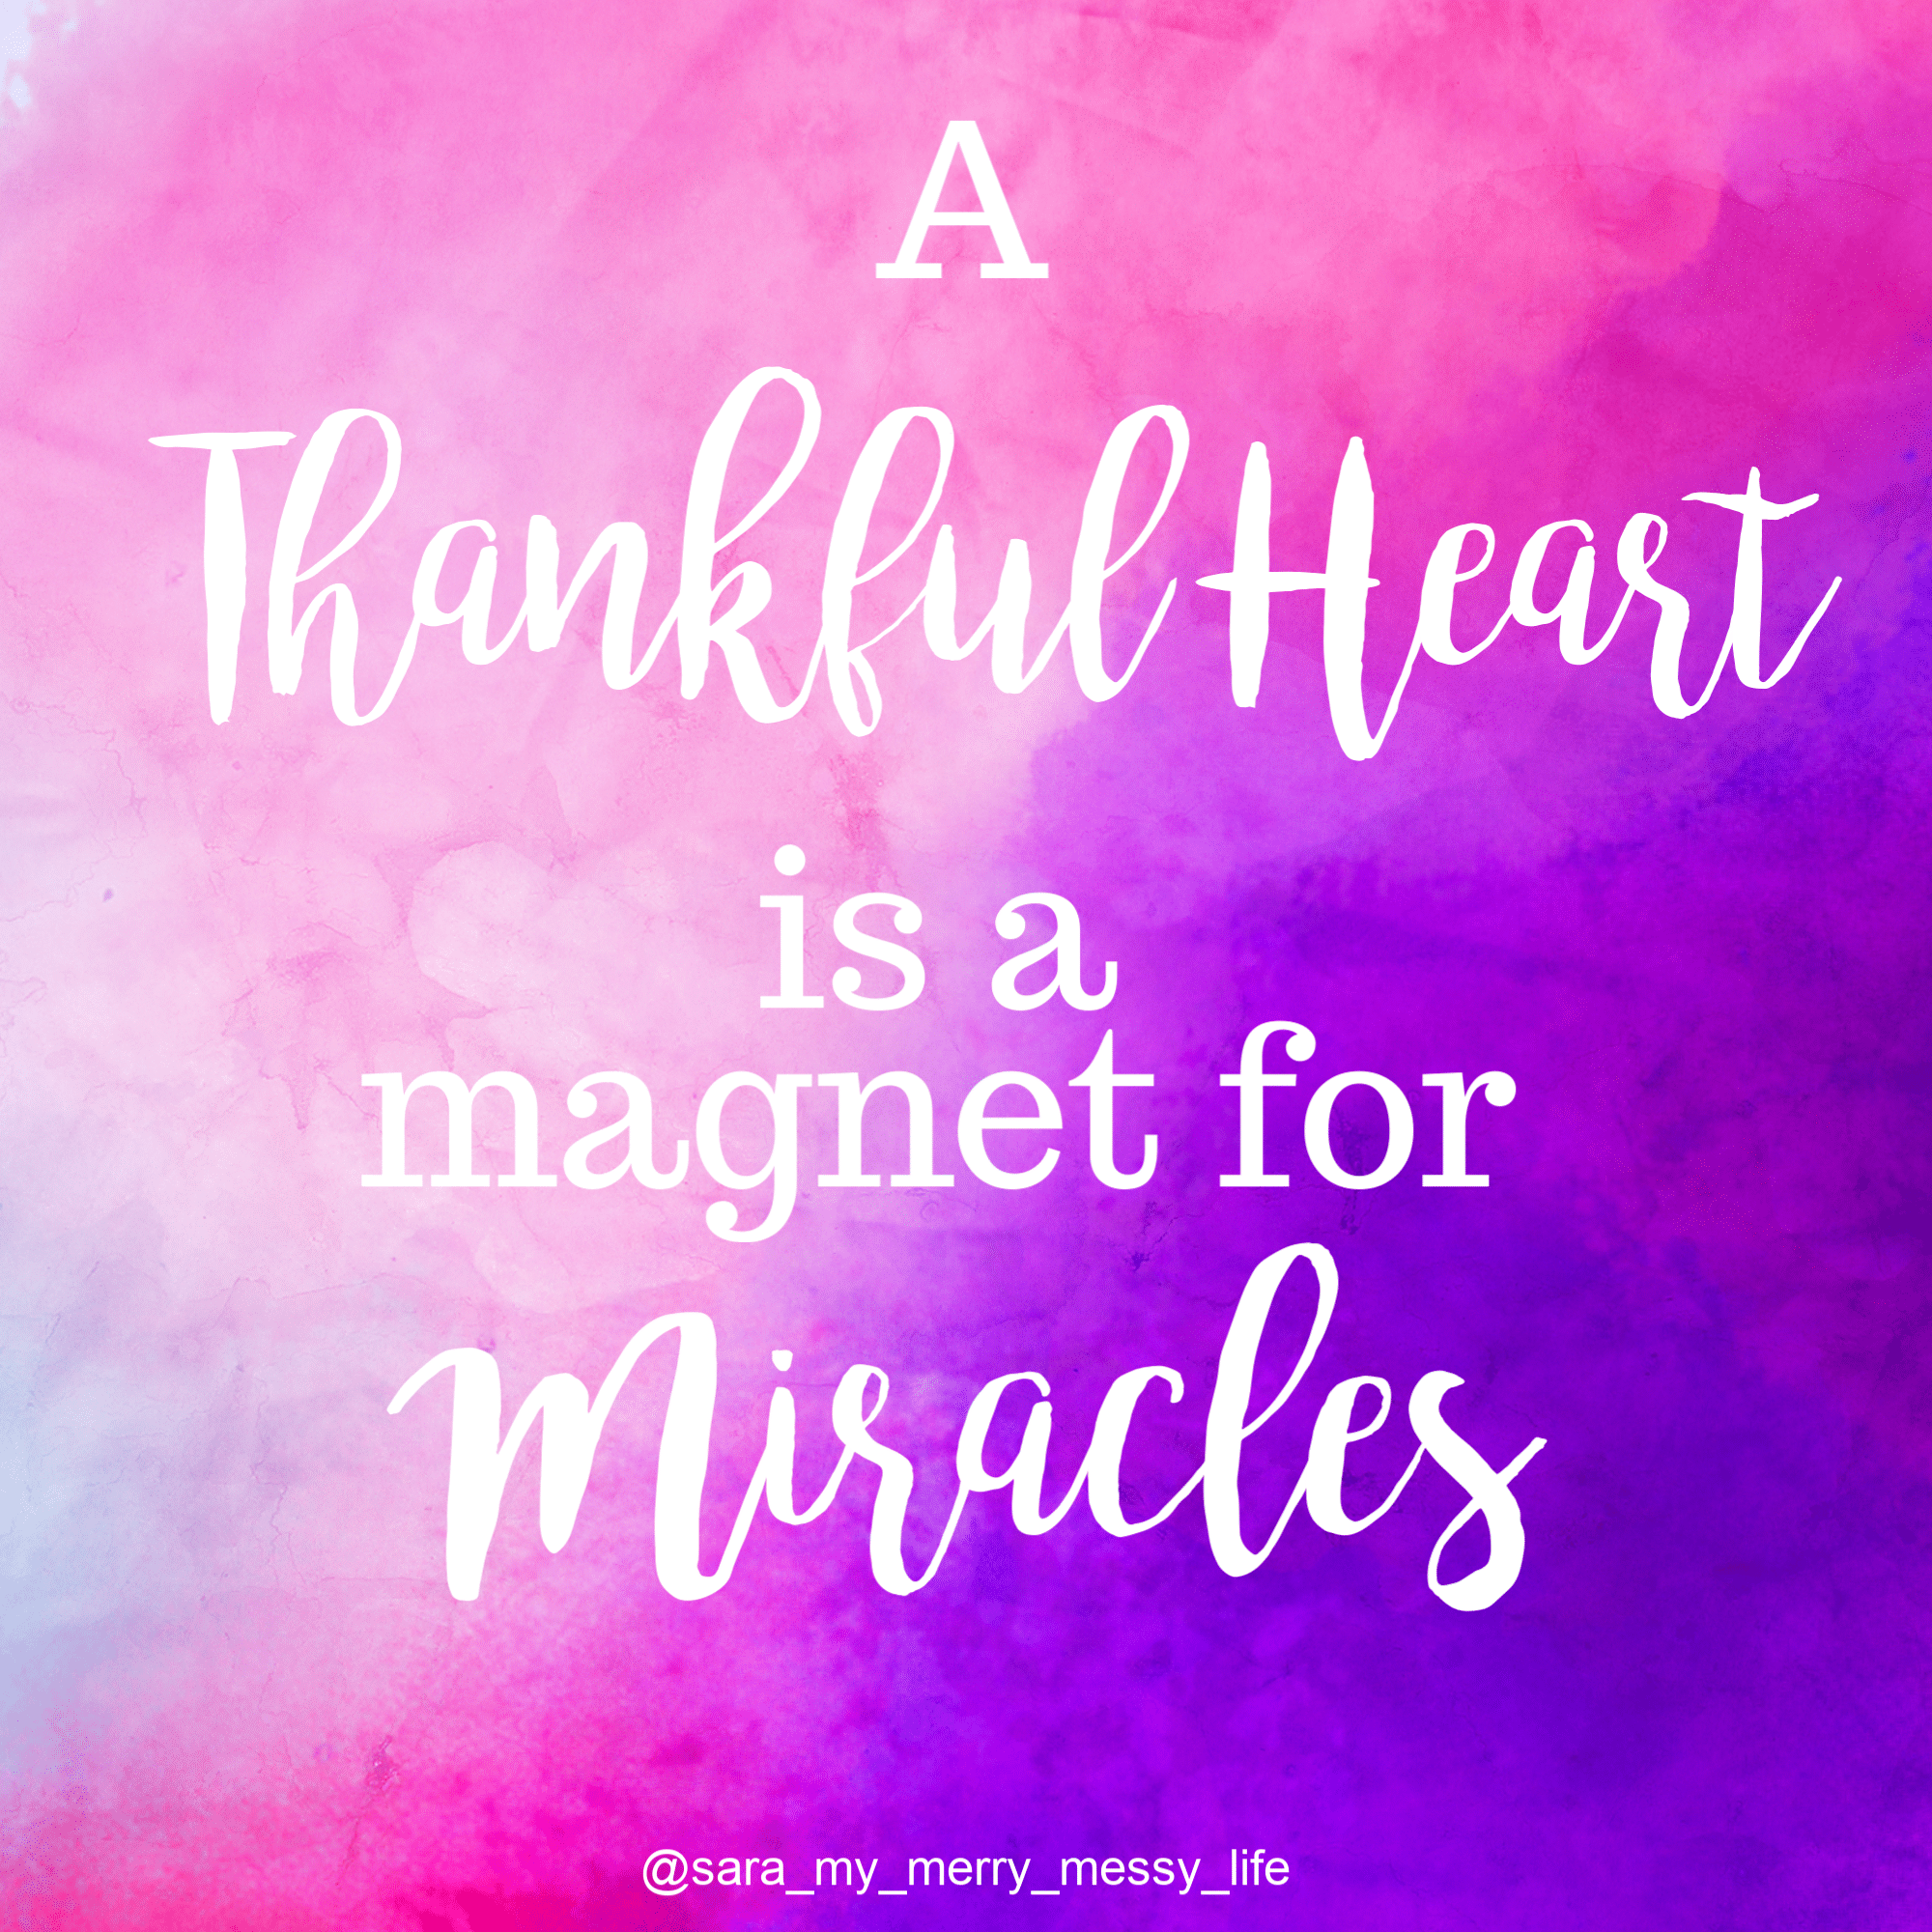 A thankful heart is a magnet for miracles.